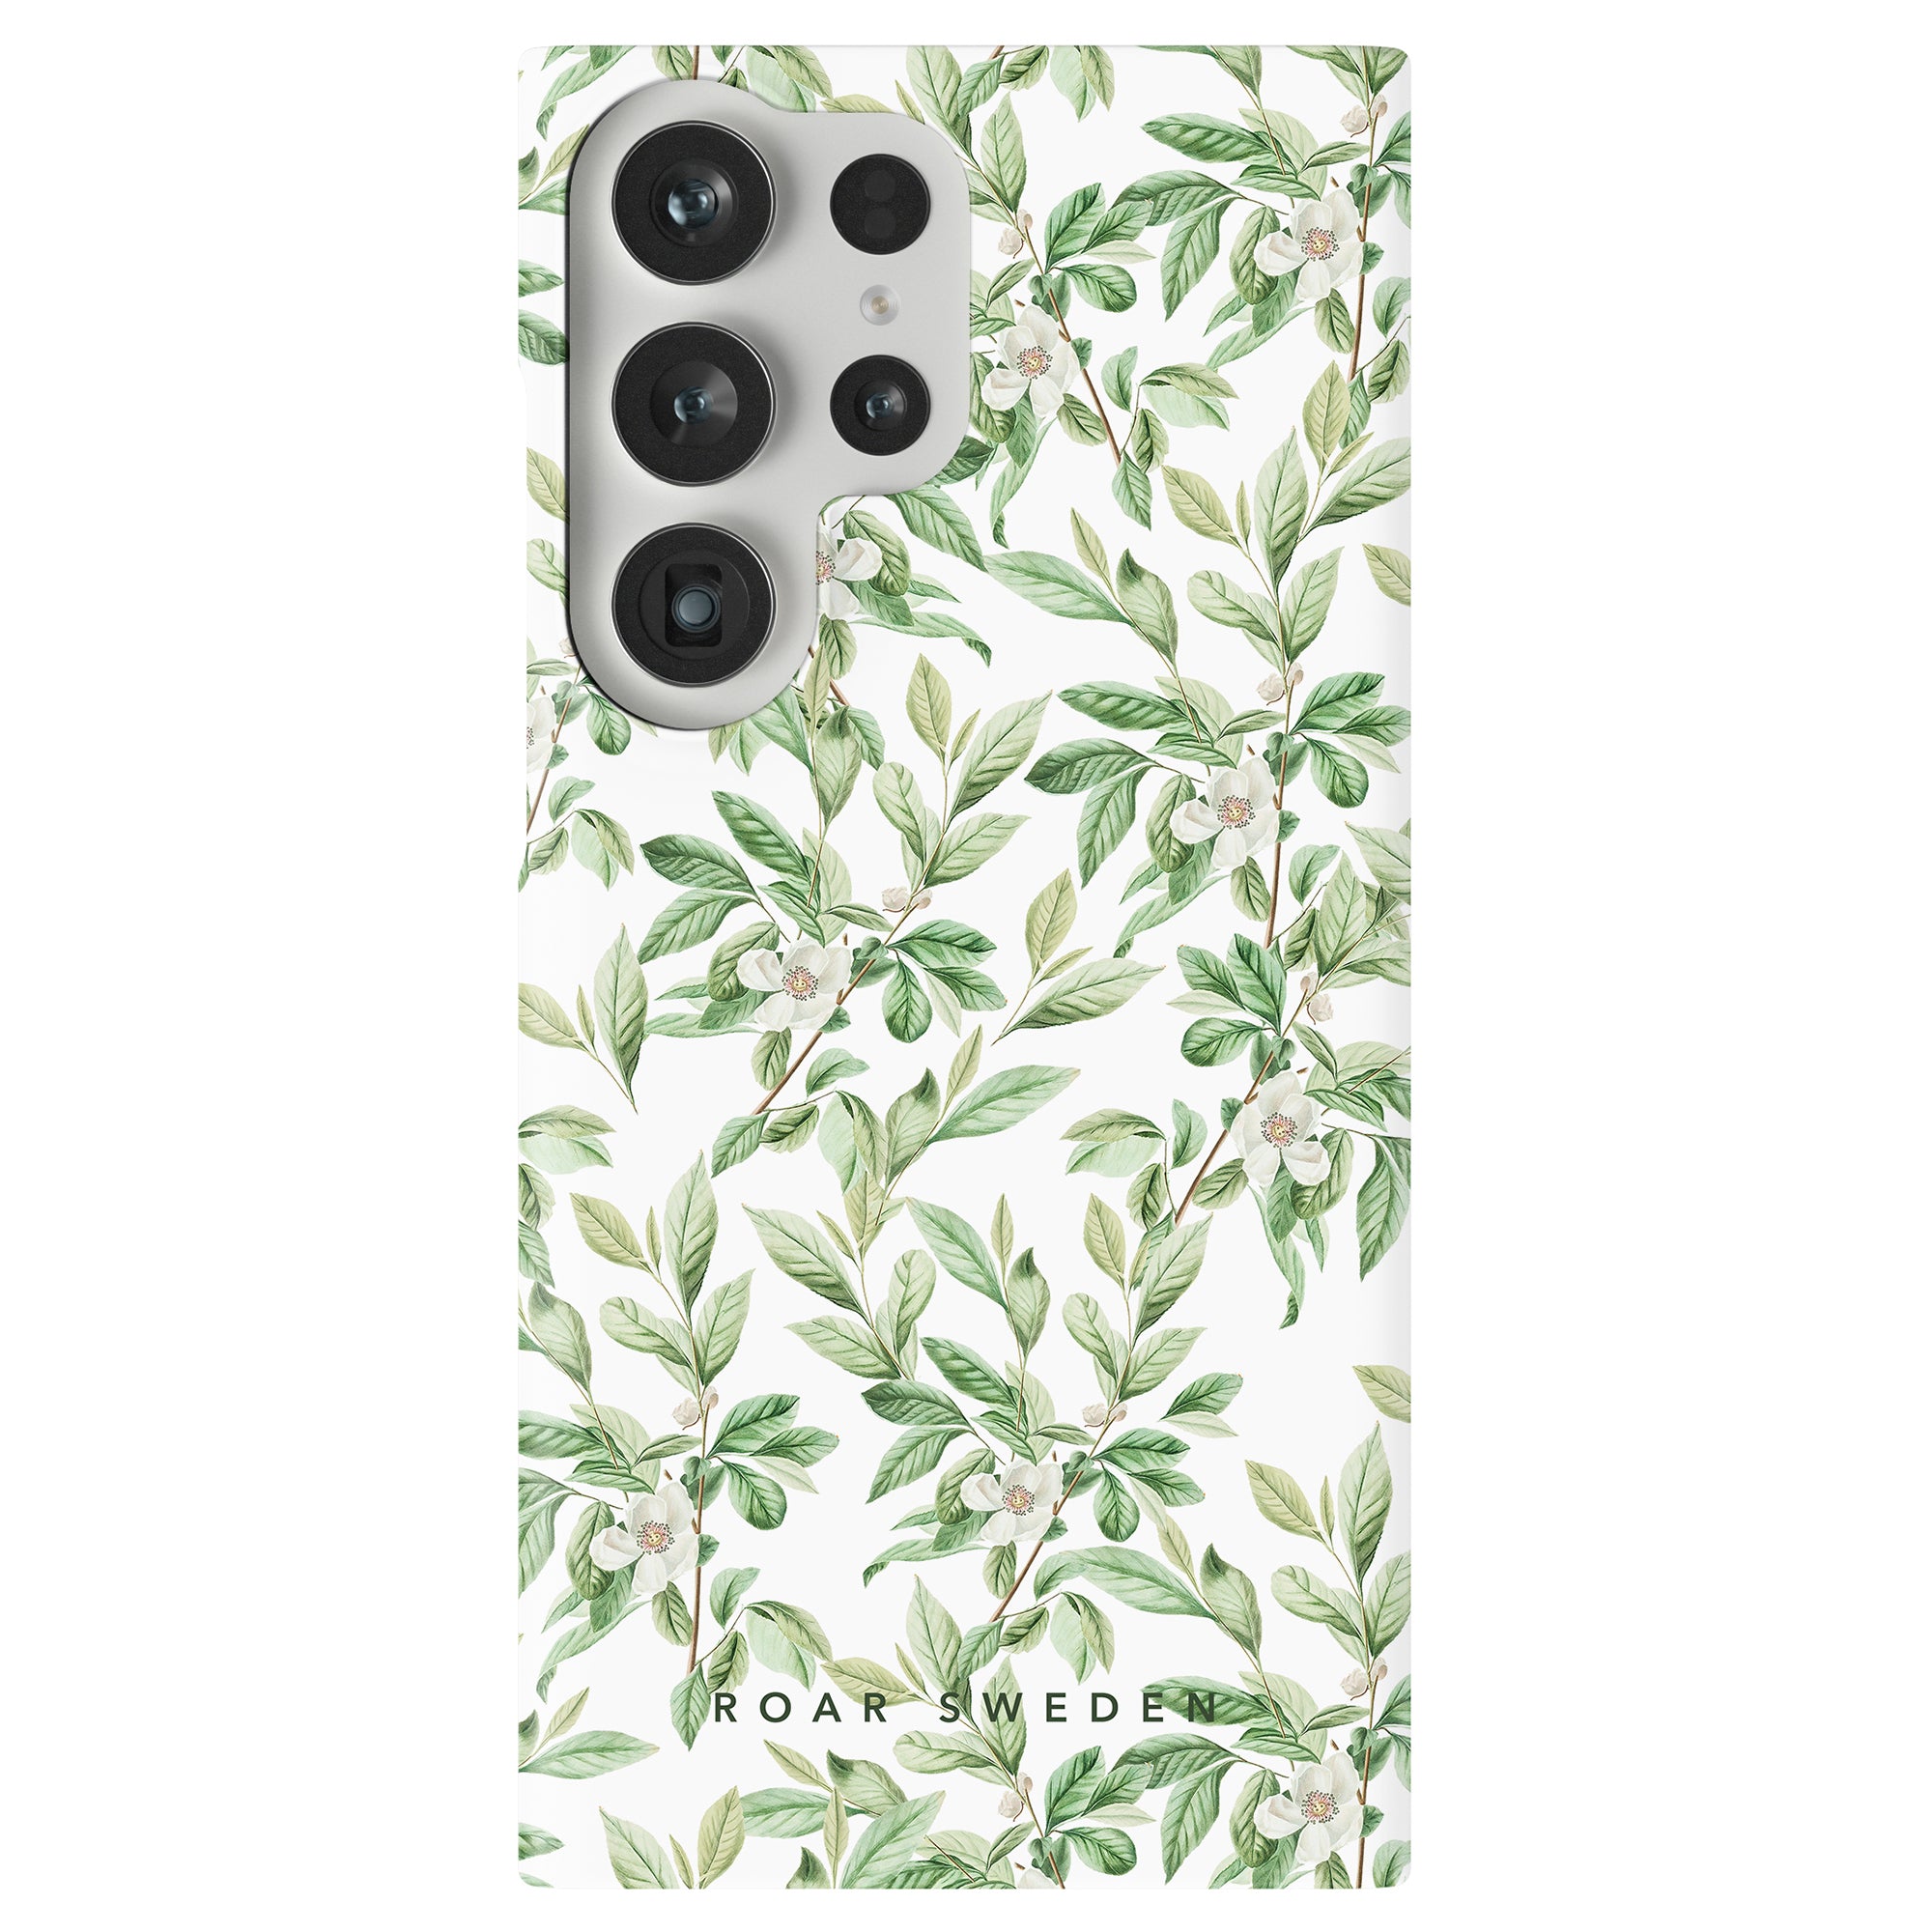 SEO-optimized product description: Spring Leaves Slim phone case with precise camera cutouts, presented on a white background.